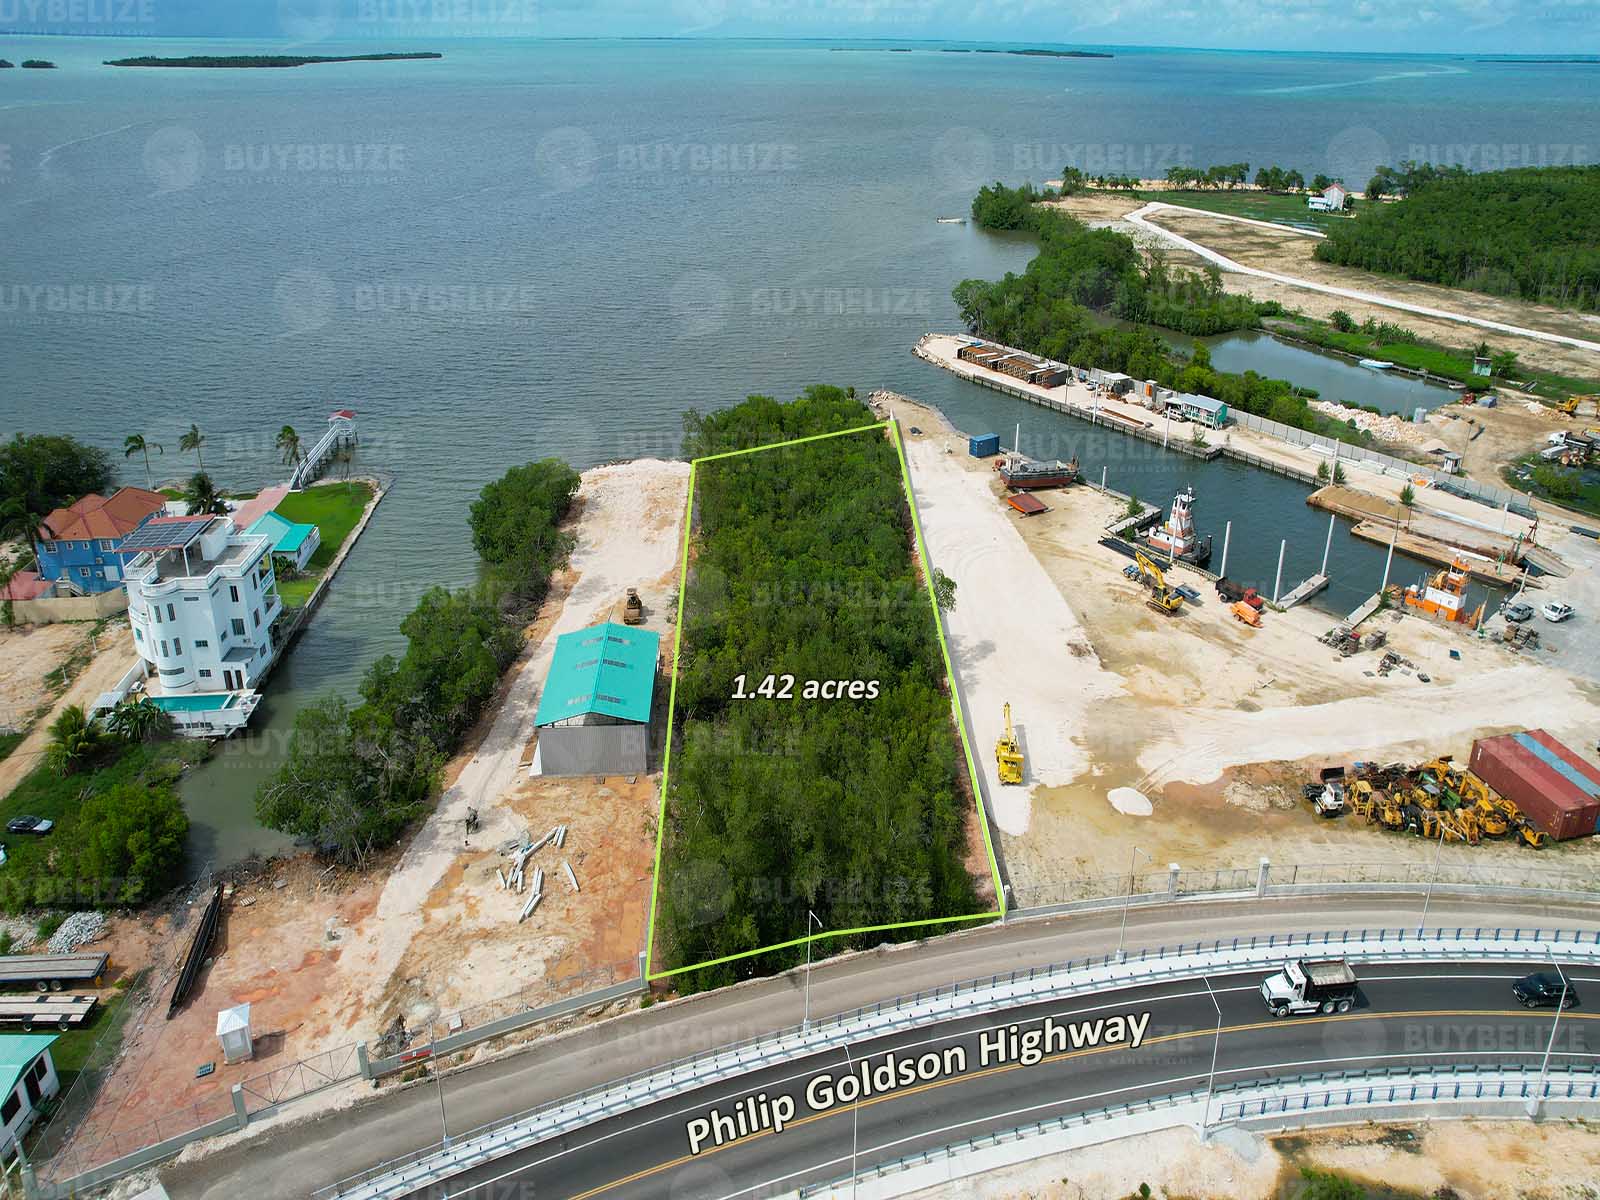 1.42 acres on the Philip Goldson Highway, Belize City